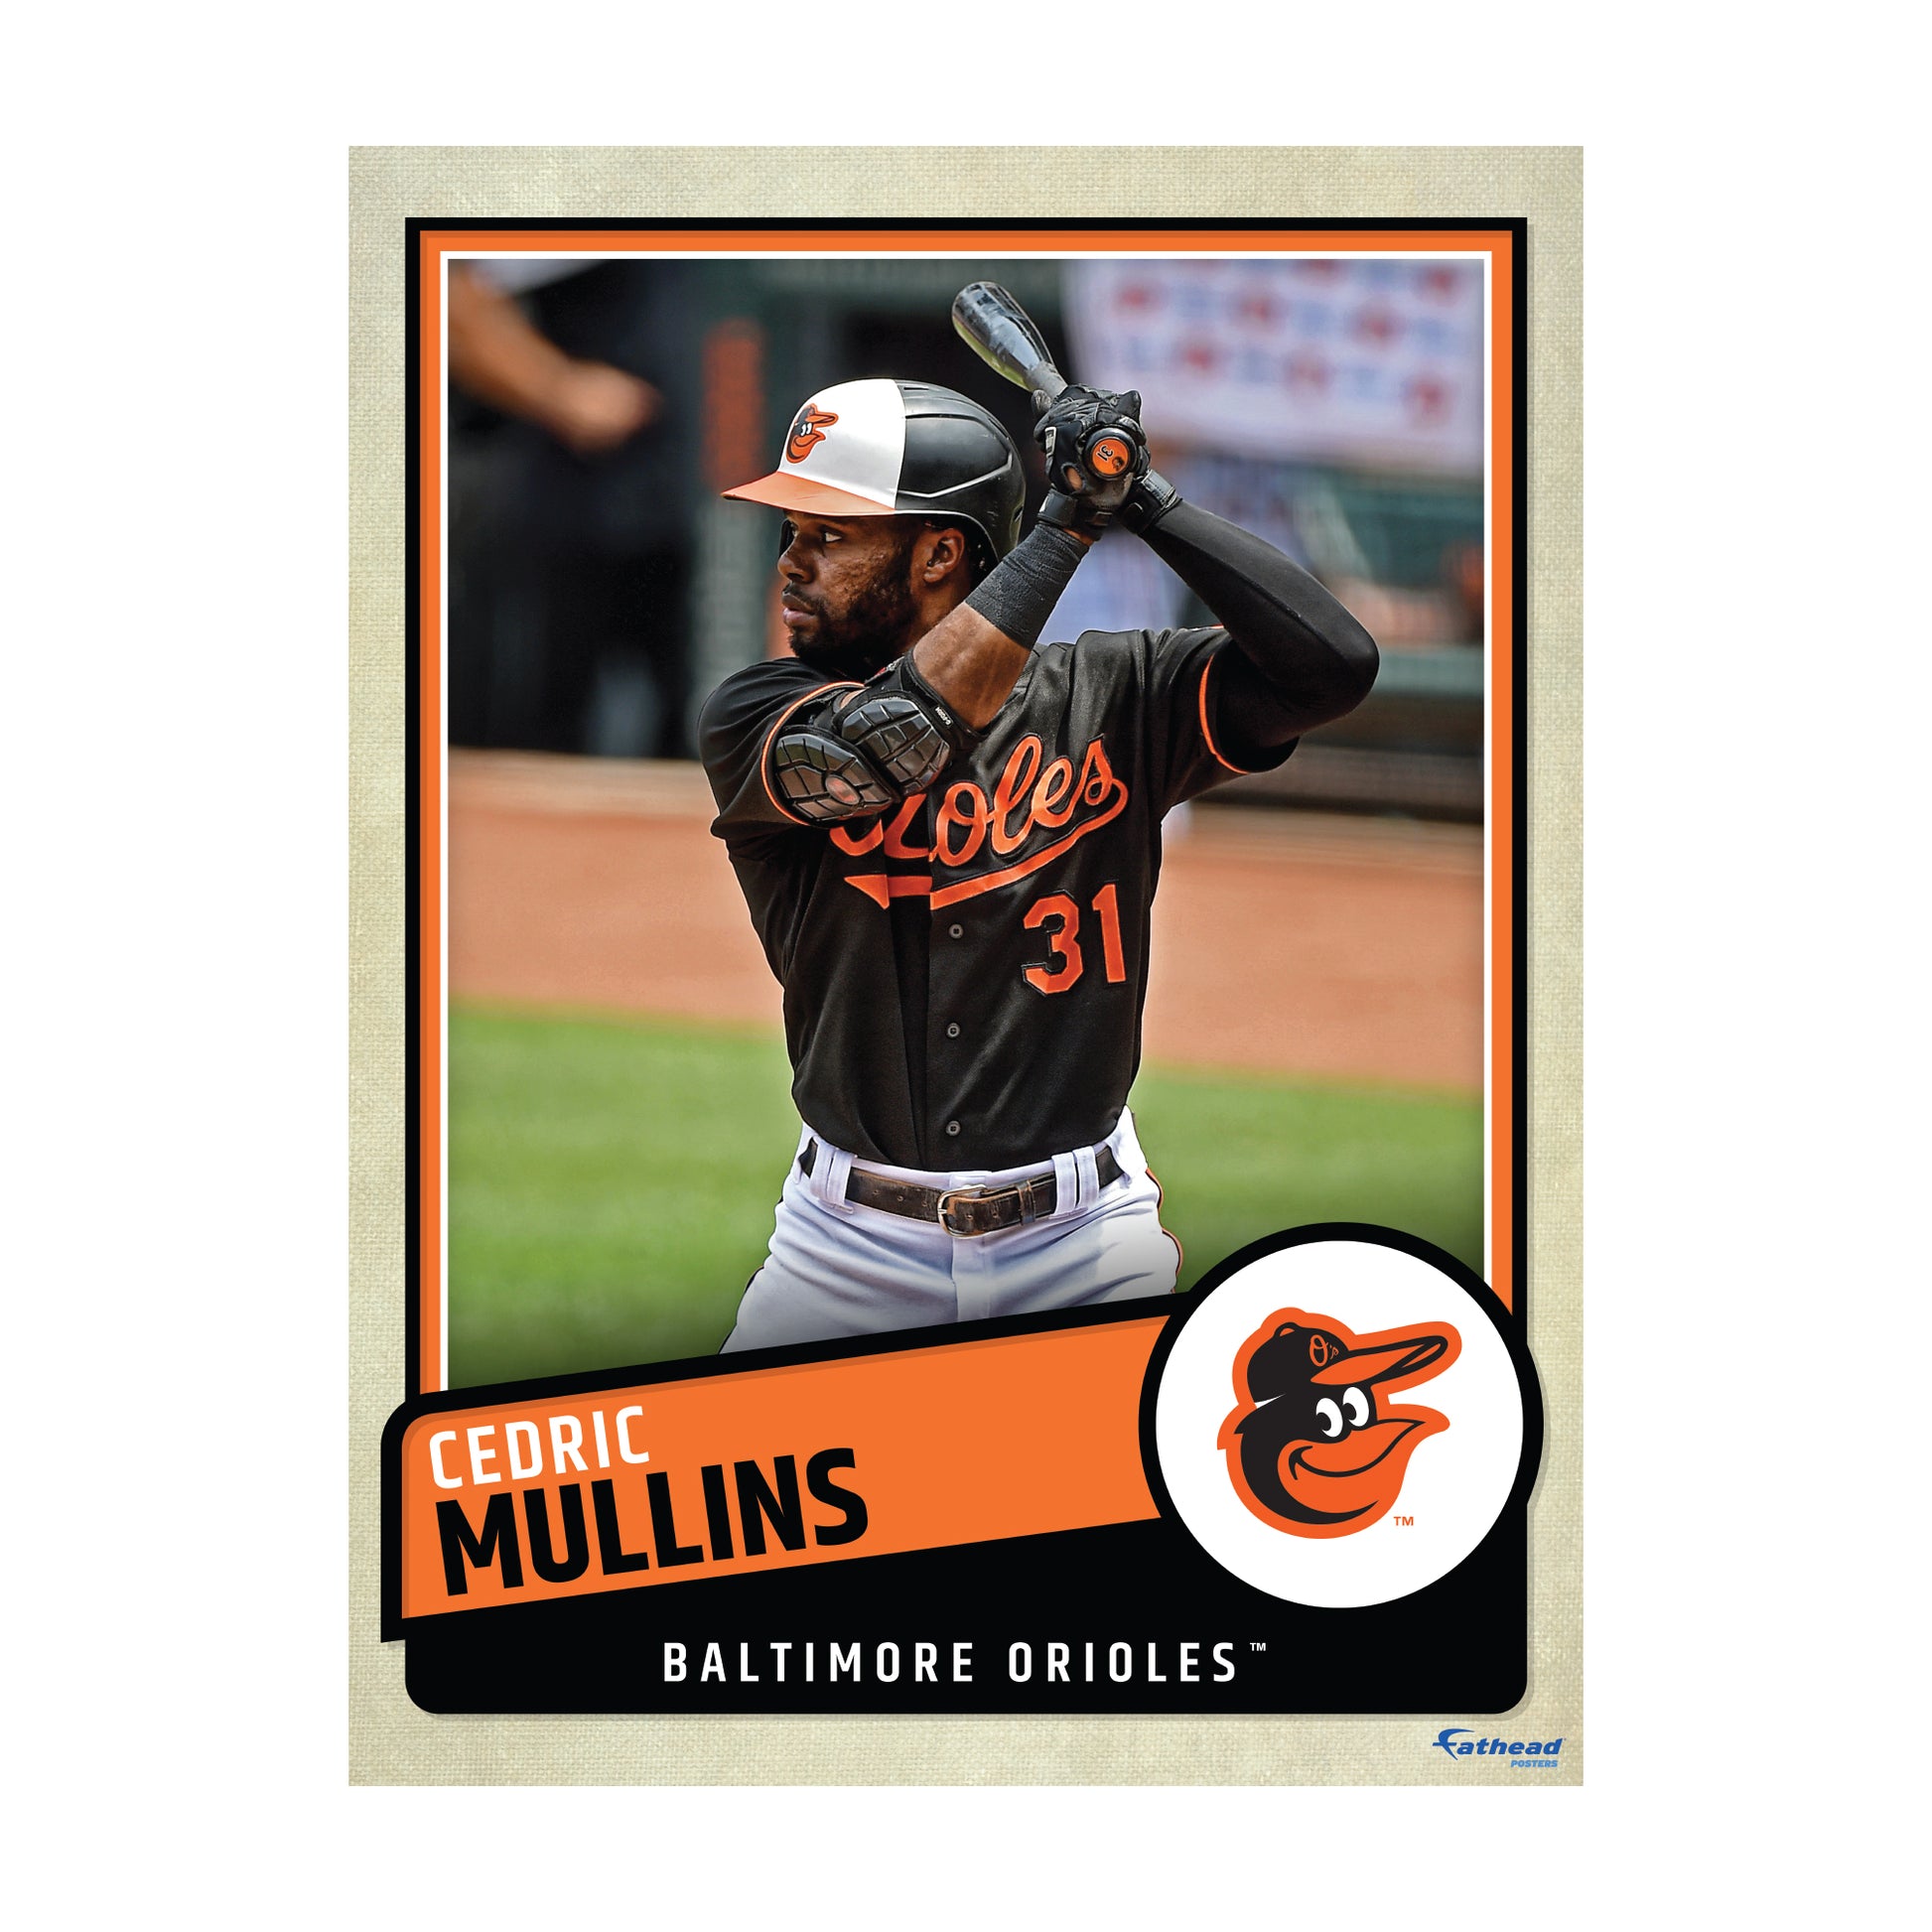 Baltimore Orioles: Cedric Mullins 2022 Poster - Officially Licensed ML –  Fathead